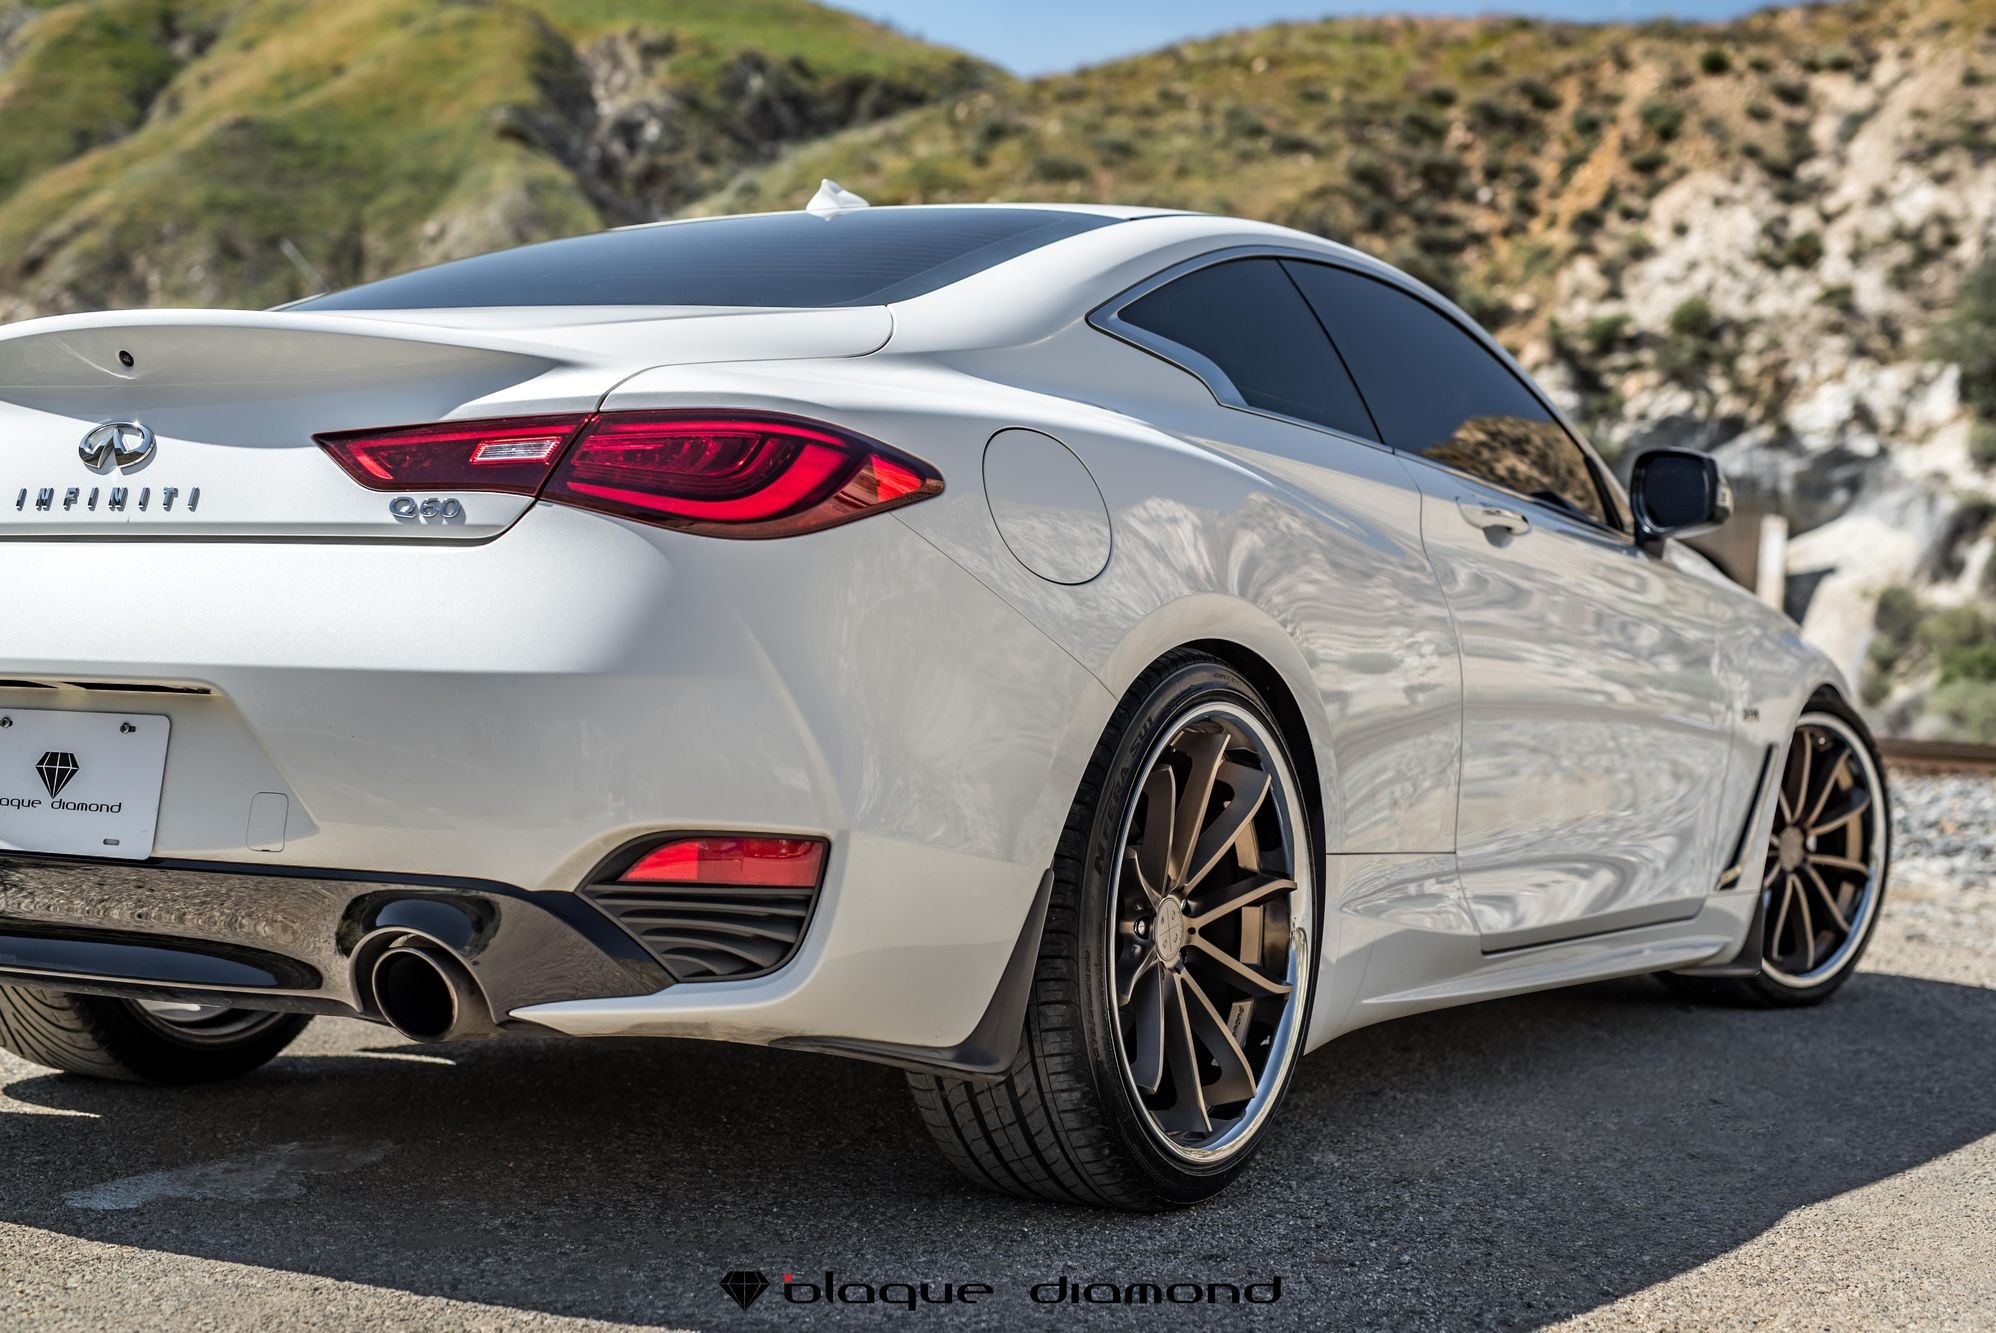 Captivating Infiniti Q60 With White Exterior Color And